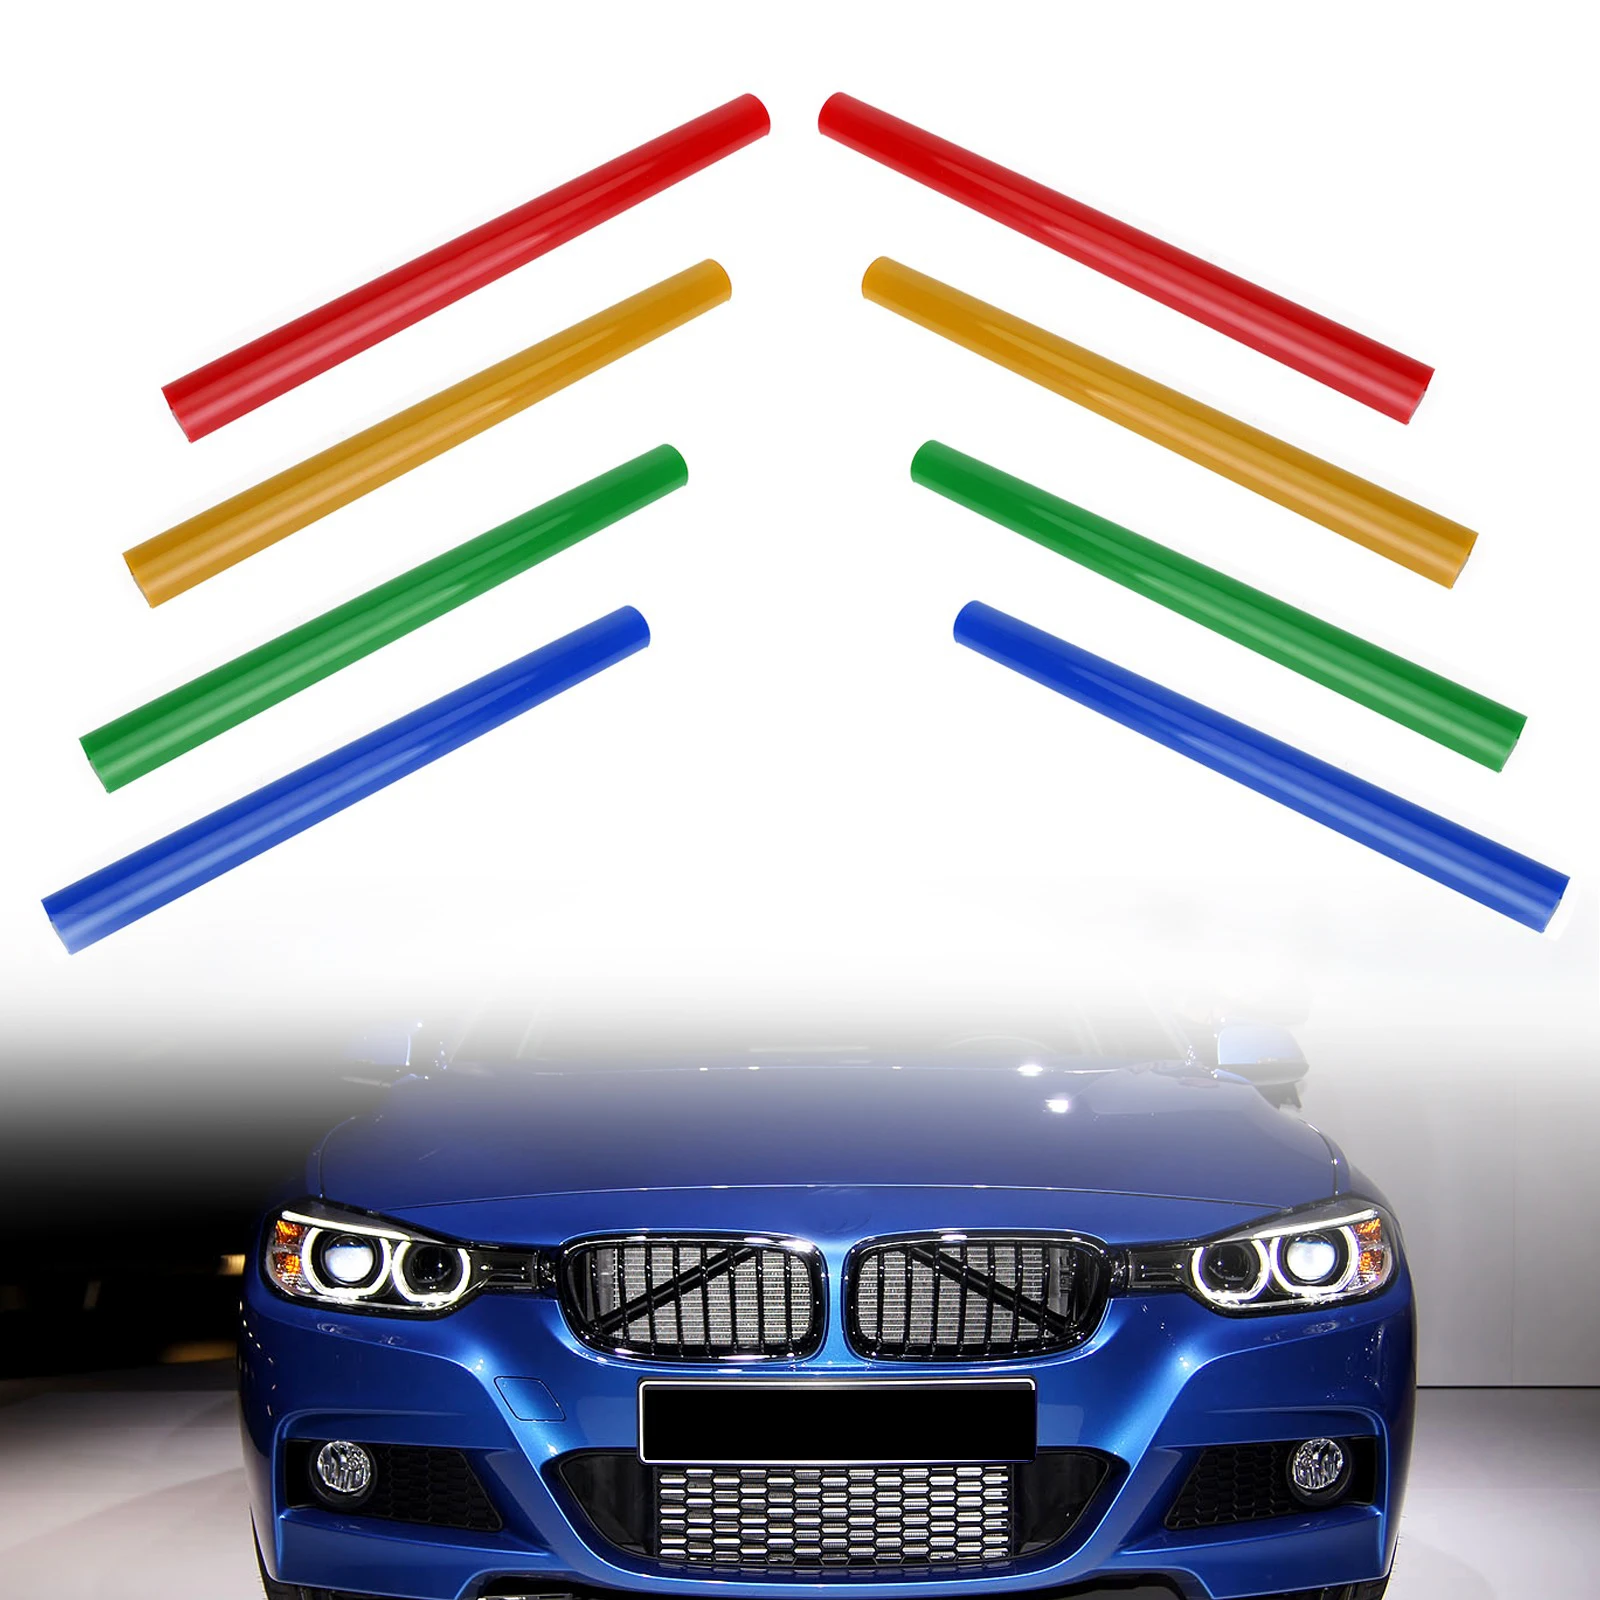 Areyourshop A Color Support Grill Bar V Brace Wrap For BMW F30 F31 F32 F33 F34 F35 51647245789 Car Auot Accessories Parts